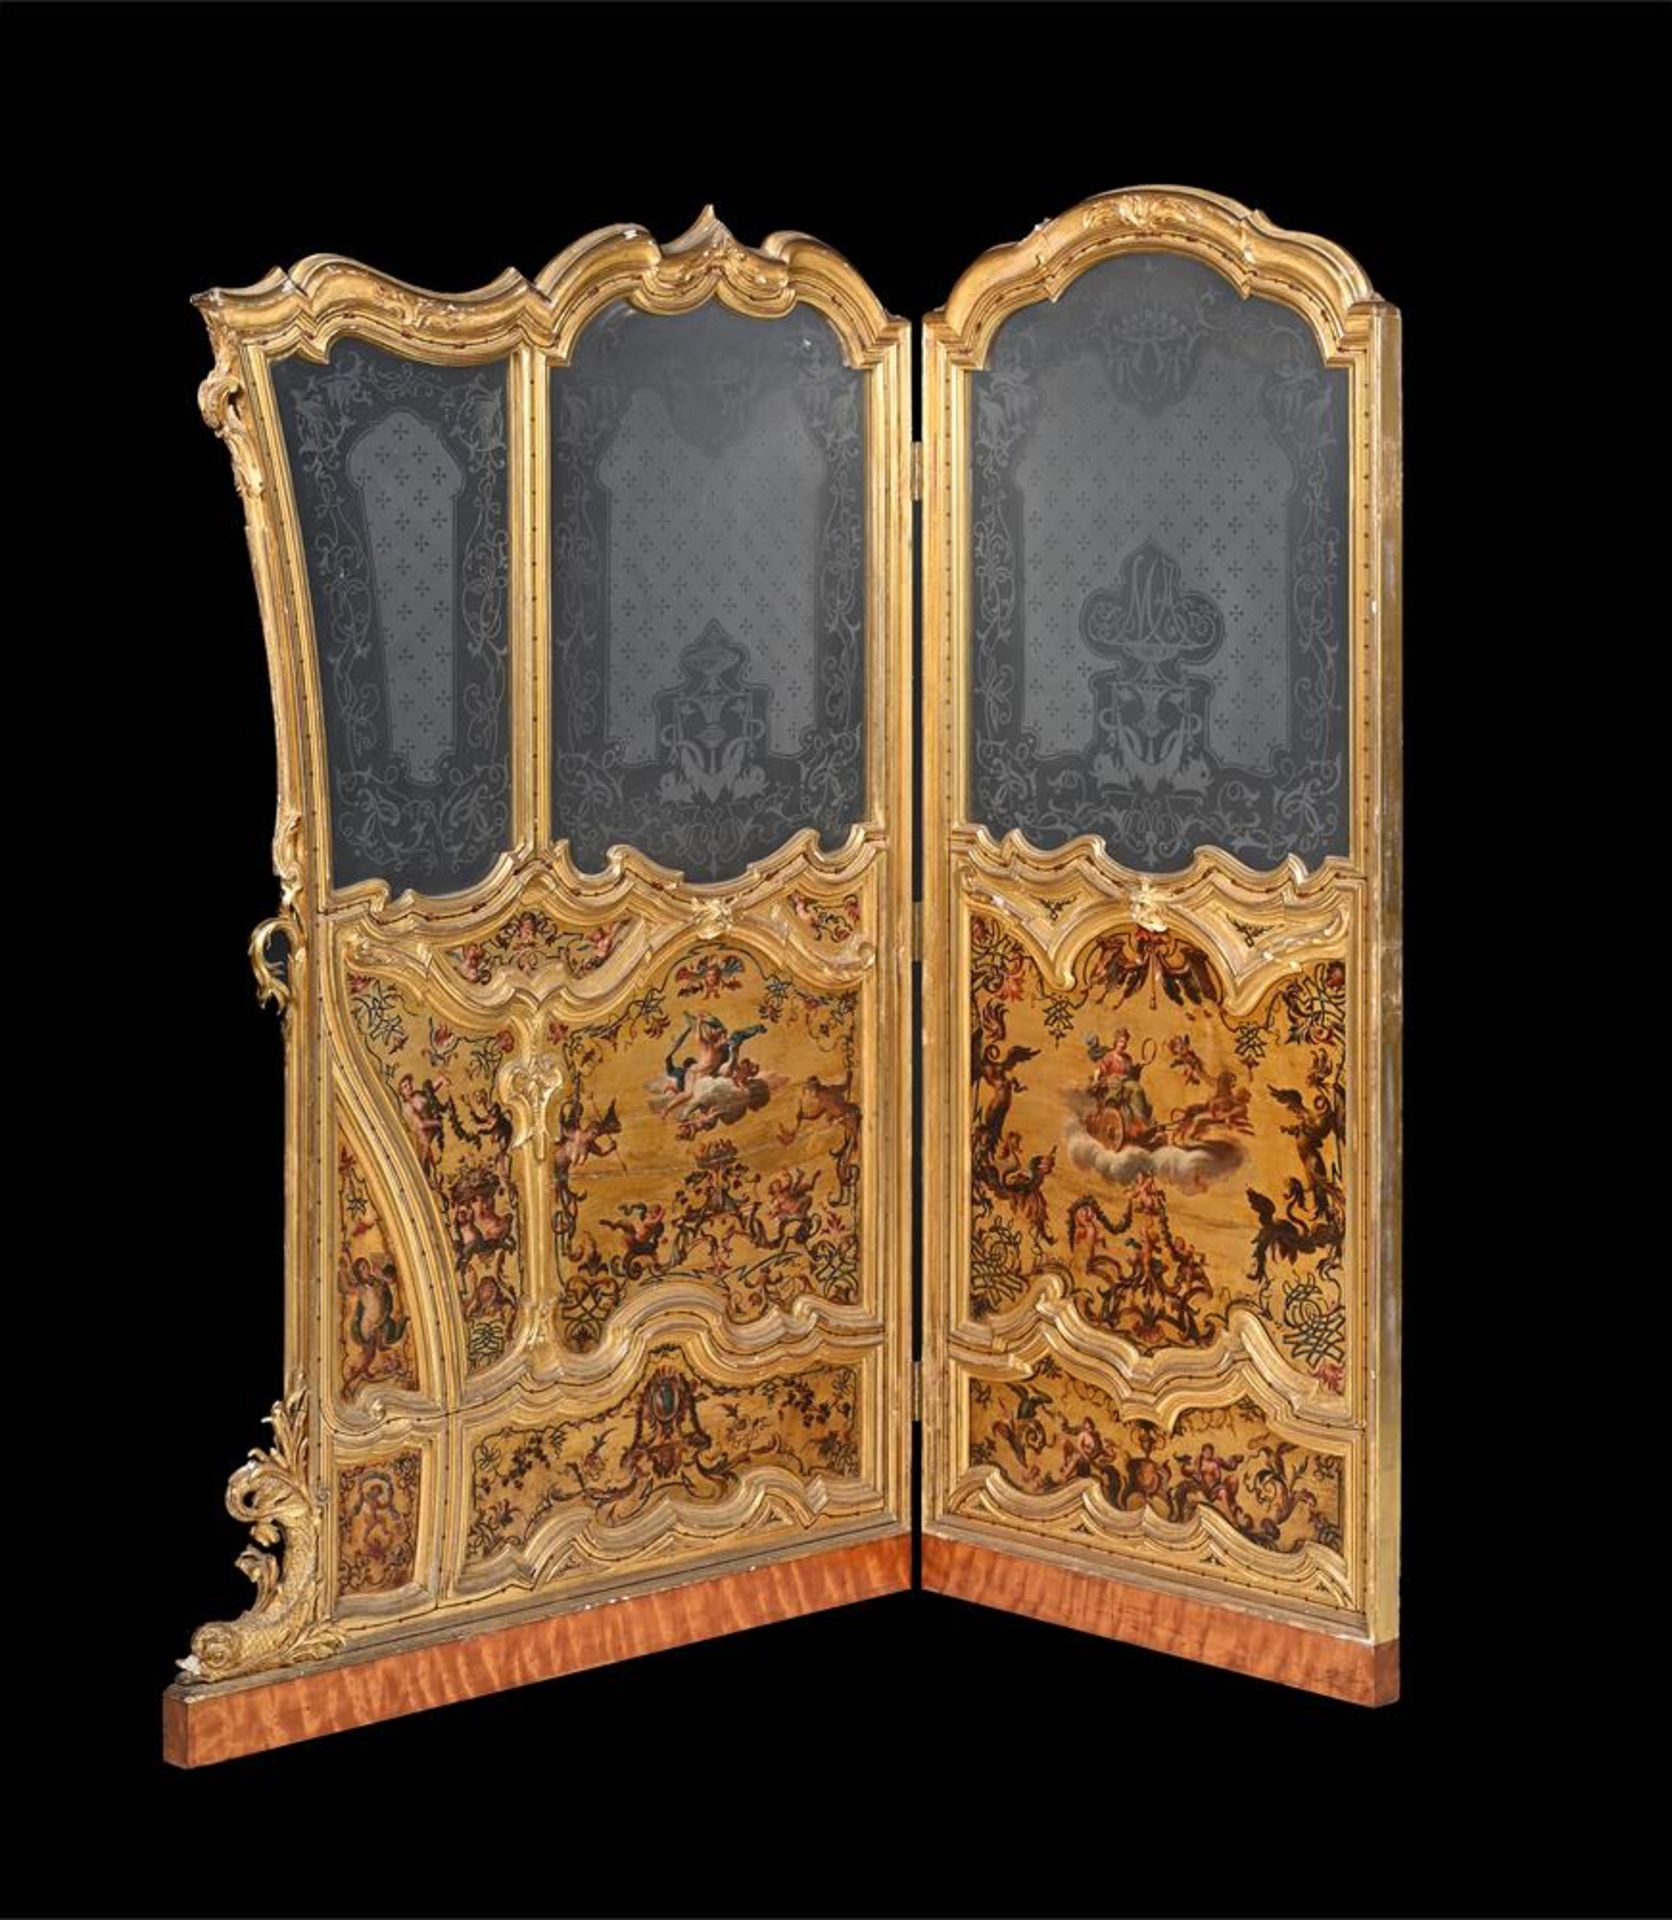 A GILTWOOD, ETCHED GLASS AND POLYCHROME PAINTED FOUR-FOLD SCREEN - Image 2 of 4